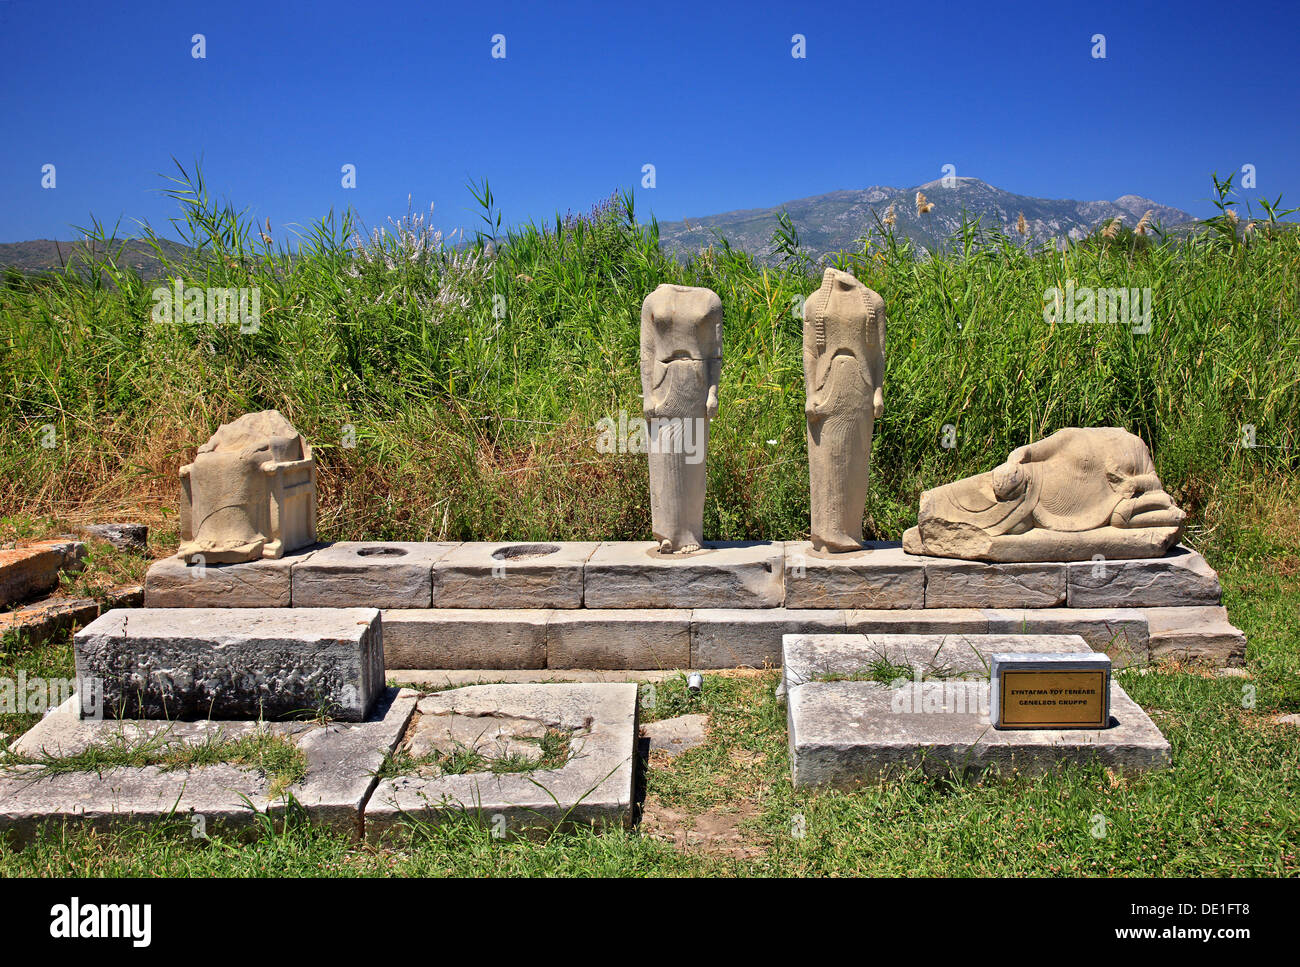 The Genelaos group (complex) of statues (replicas) at the archaeological site of Heraion, Samos island, Greece Stock Photo